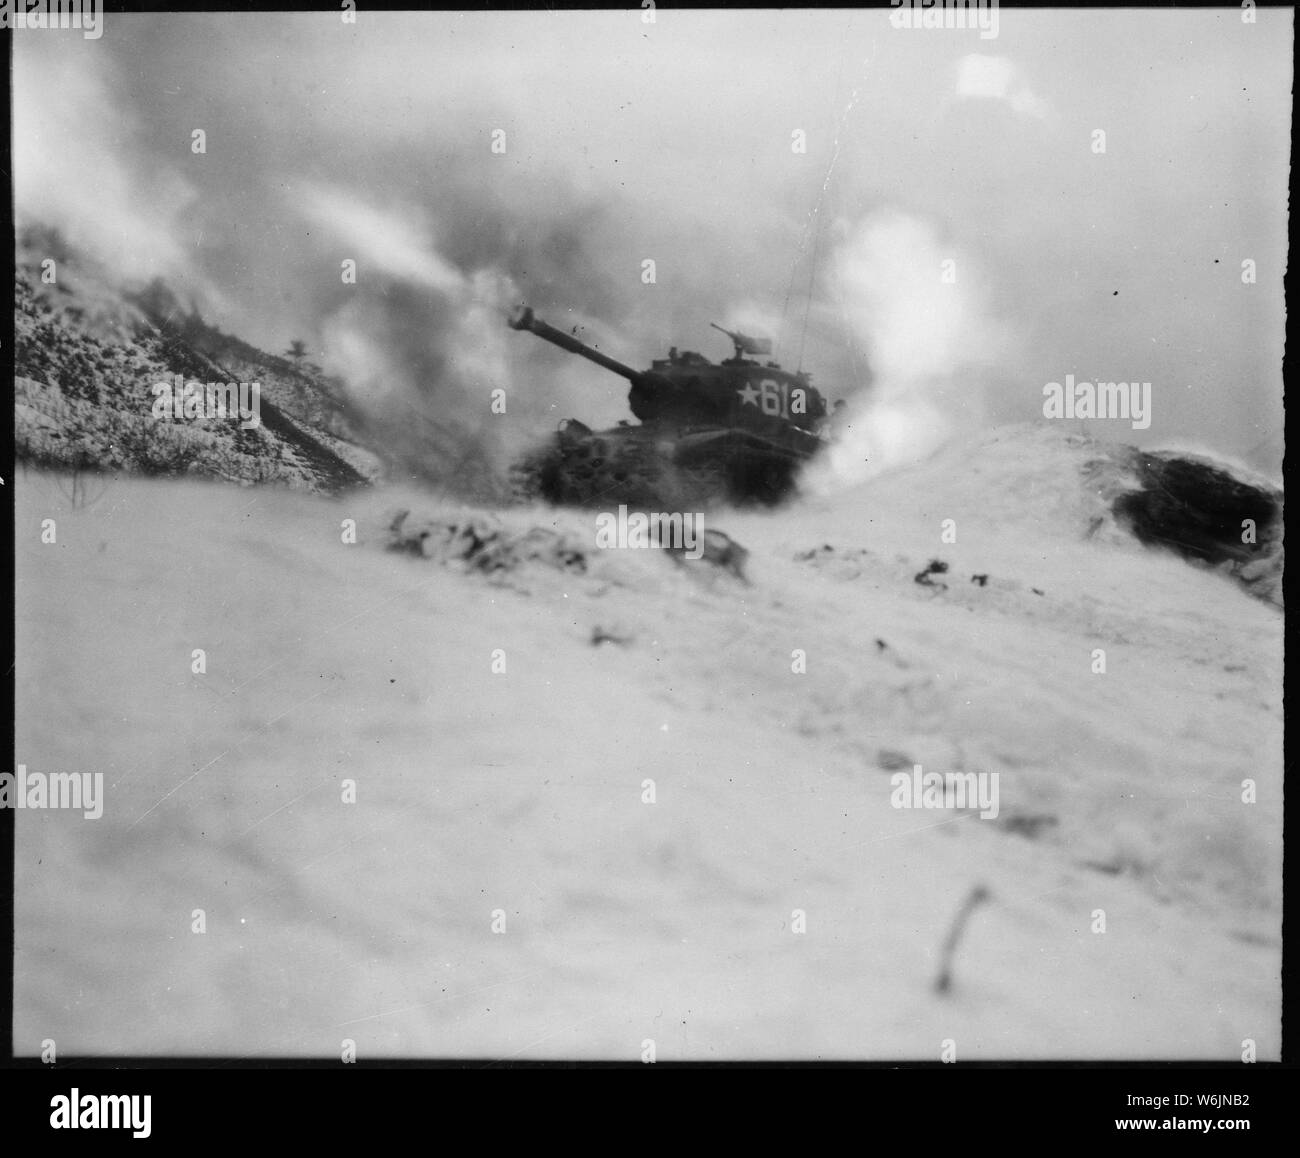 Near Song Sil-li, Korea, a tank of 6th Tank Battalion, fires on enemy positions in support of the 19th Regimental Combat Team.; General notes:  Use War and Conflict Number 1438 when ordering a reproduction or requesting information about this image. Stock Photo